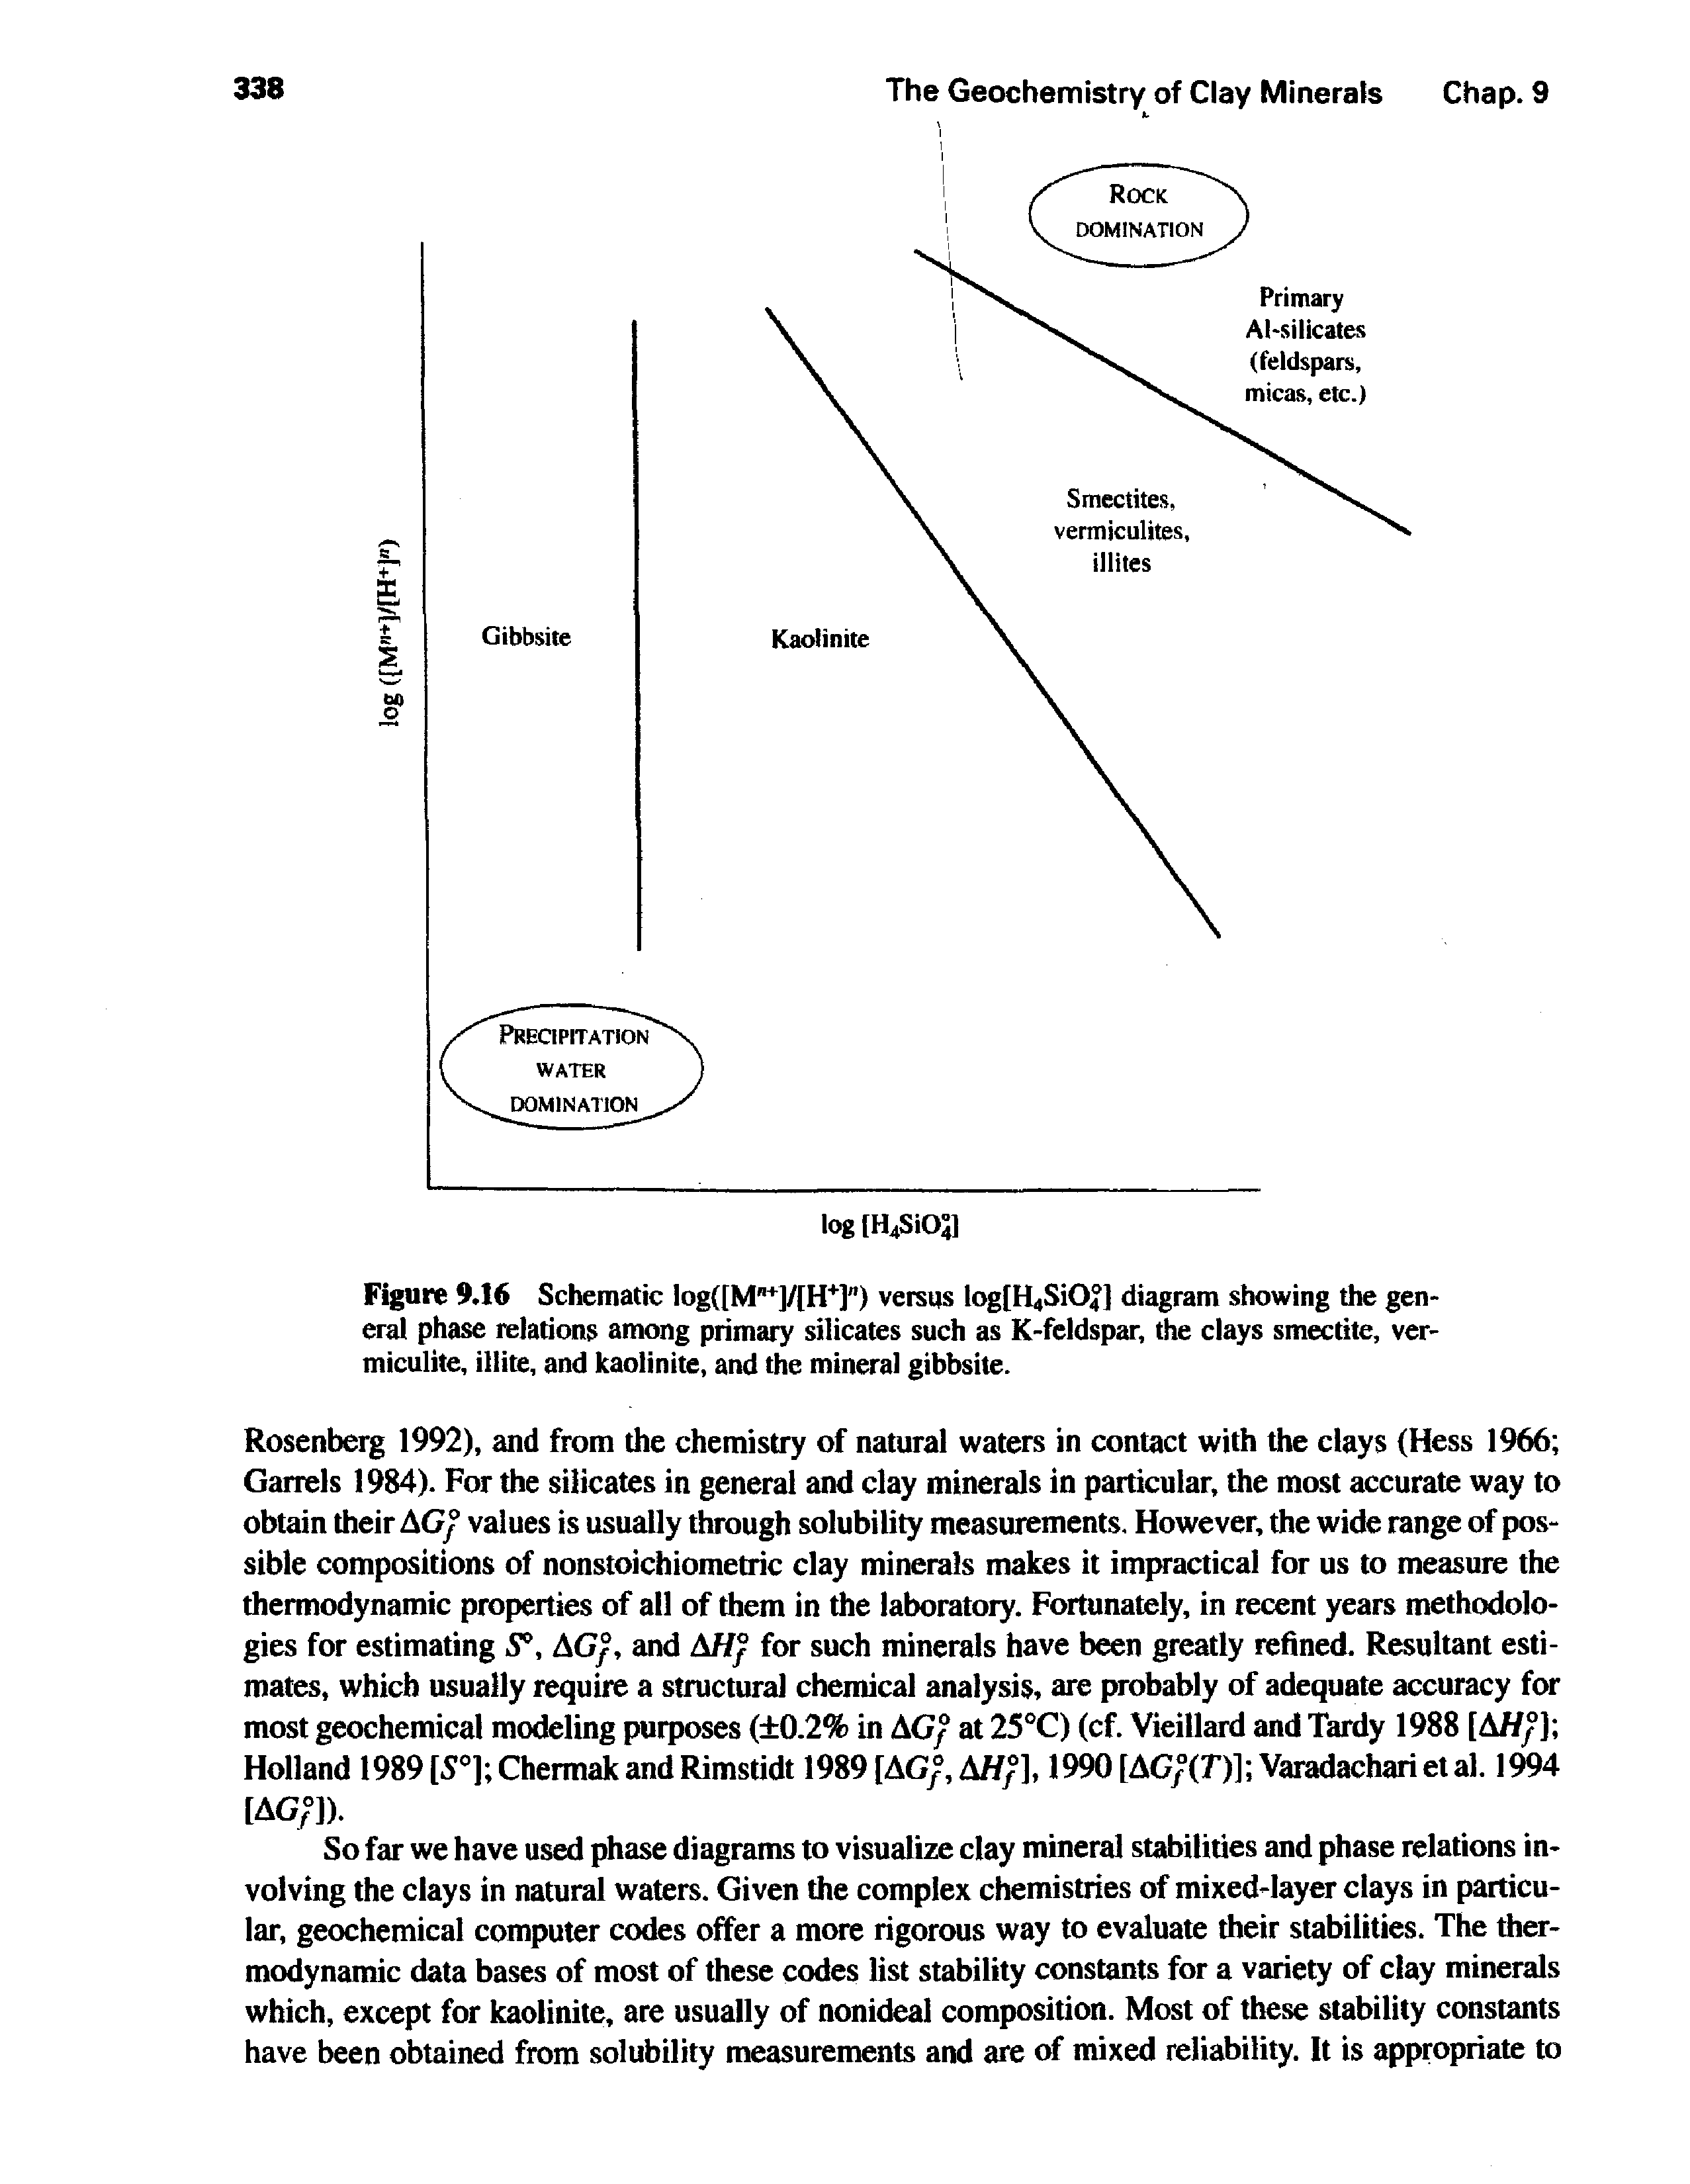 Figure 9.16 Schematic log [M" ]/[H ]") versus log[H4Si04] diagram showing the general phase relations among primary silicates such as K-feldspar, the clays smectite, ver-miculite, illite, and kaolinite, and the mineral gibbsite.